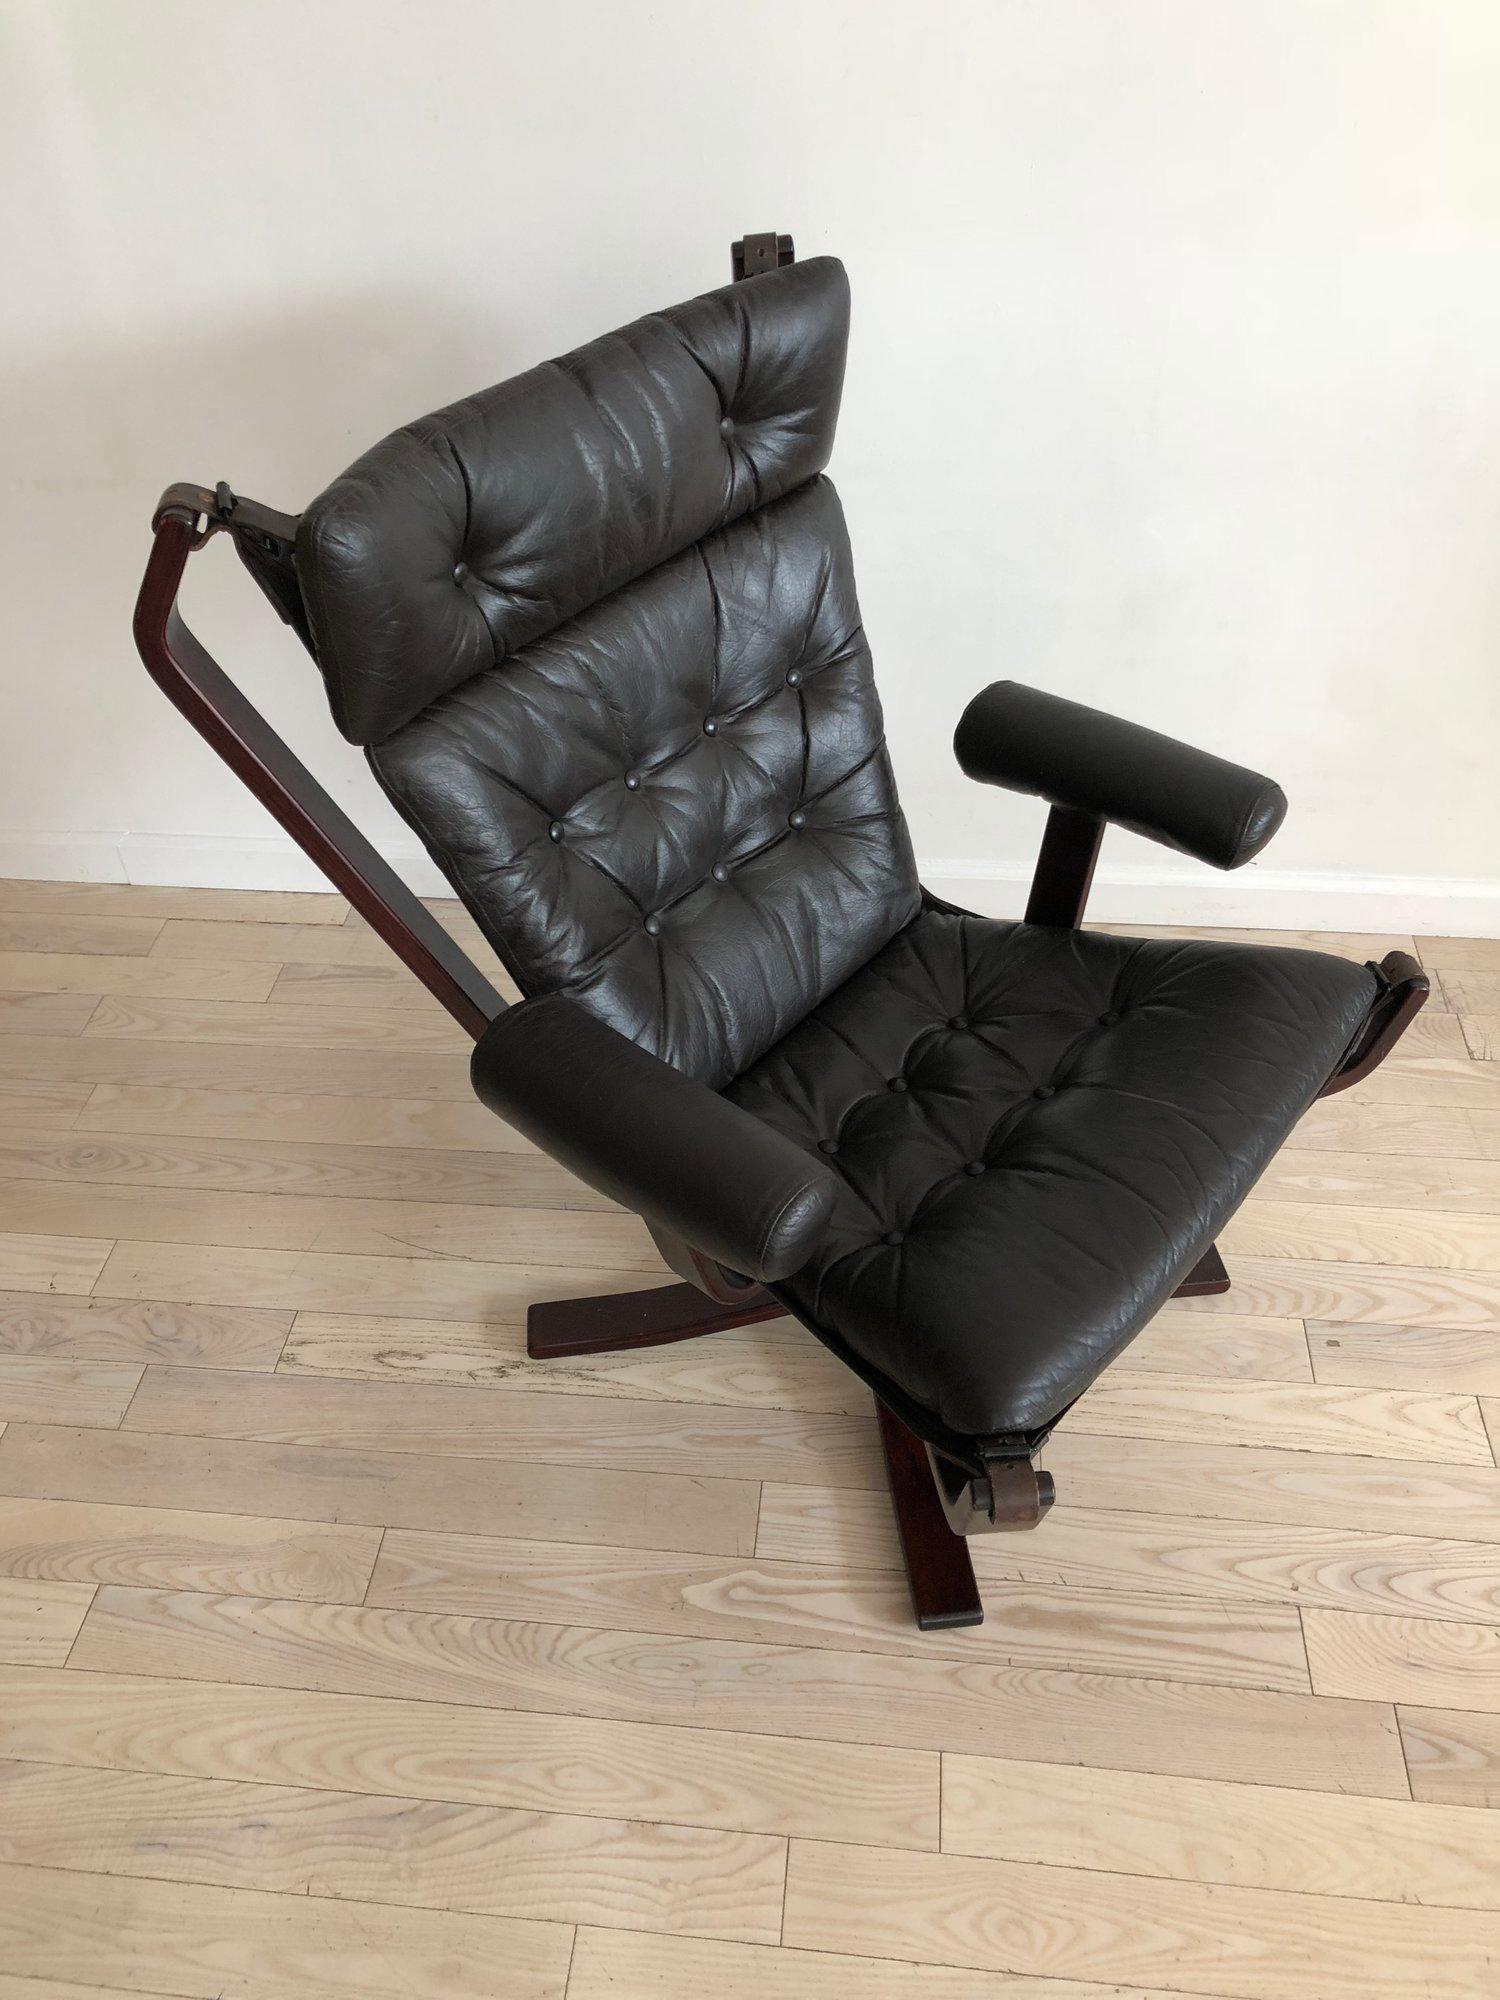 Armed 1960s Rosewood Norwegian Leather Falcon Style Chair After Sigurd Ressell In Excellent Condition For Sale In Brooklyn, NY